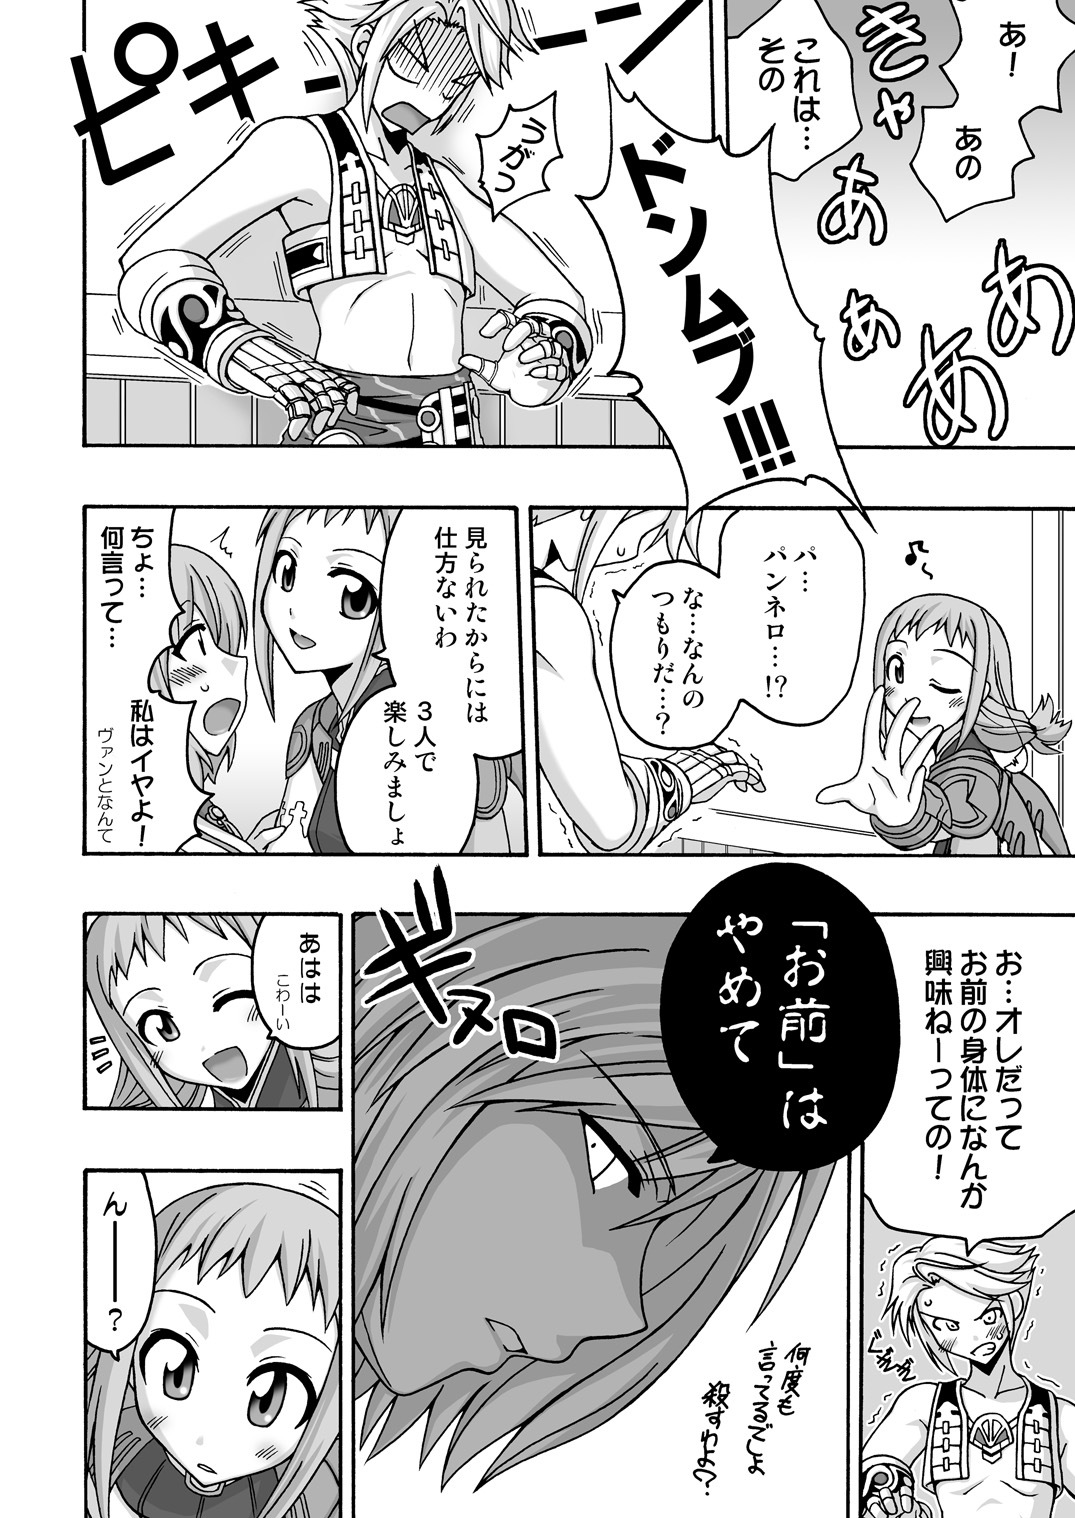 (C70) [FruitsJam (Mikagami Sou)] In the ROOM (Final Fantasy XII) page 7 full